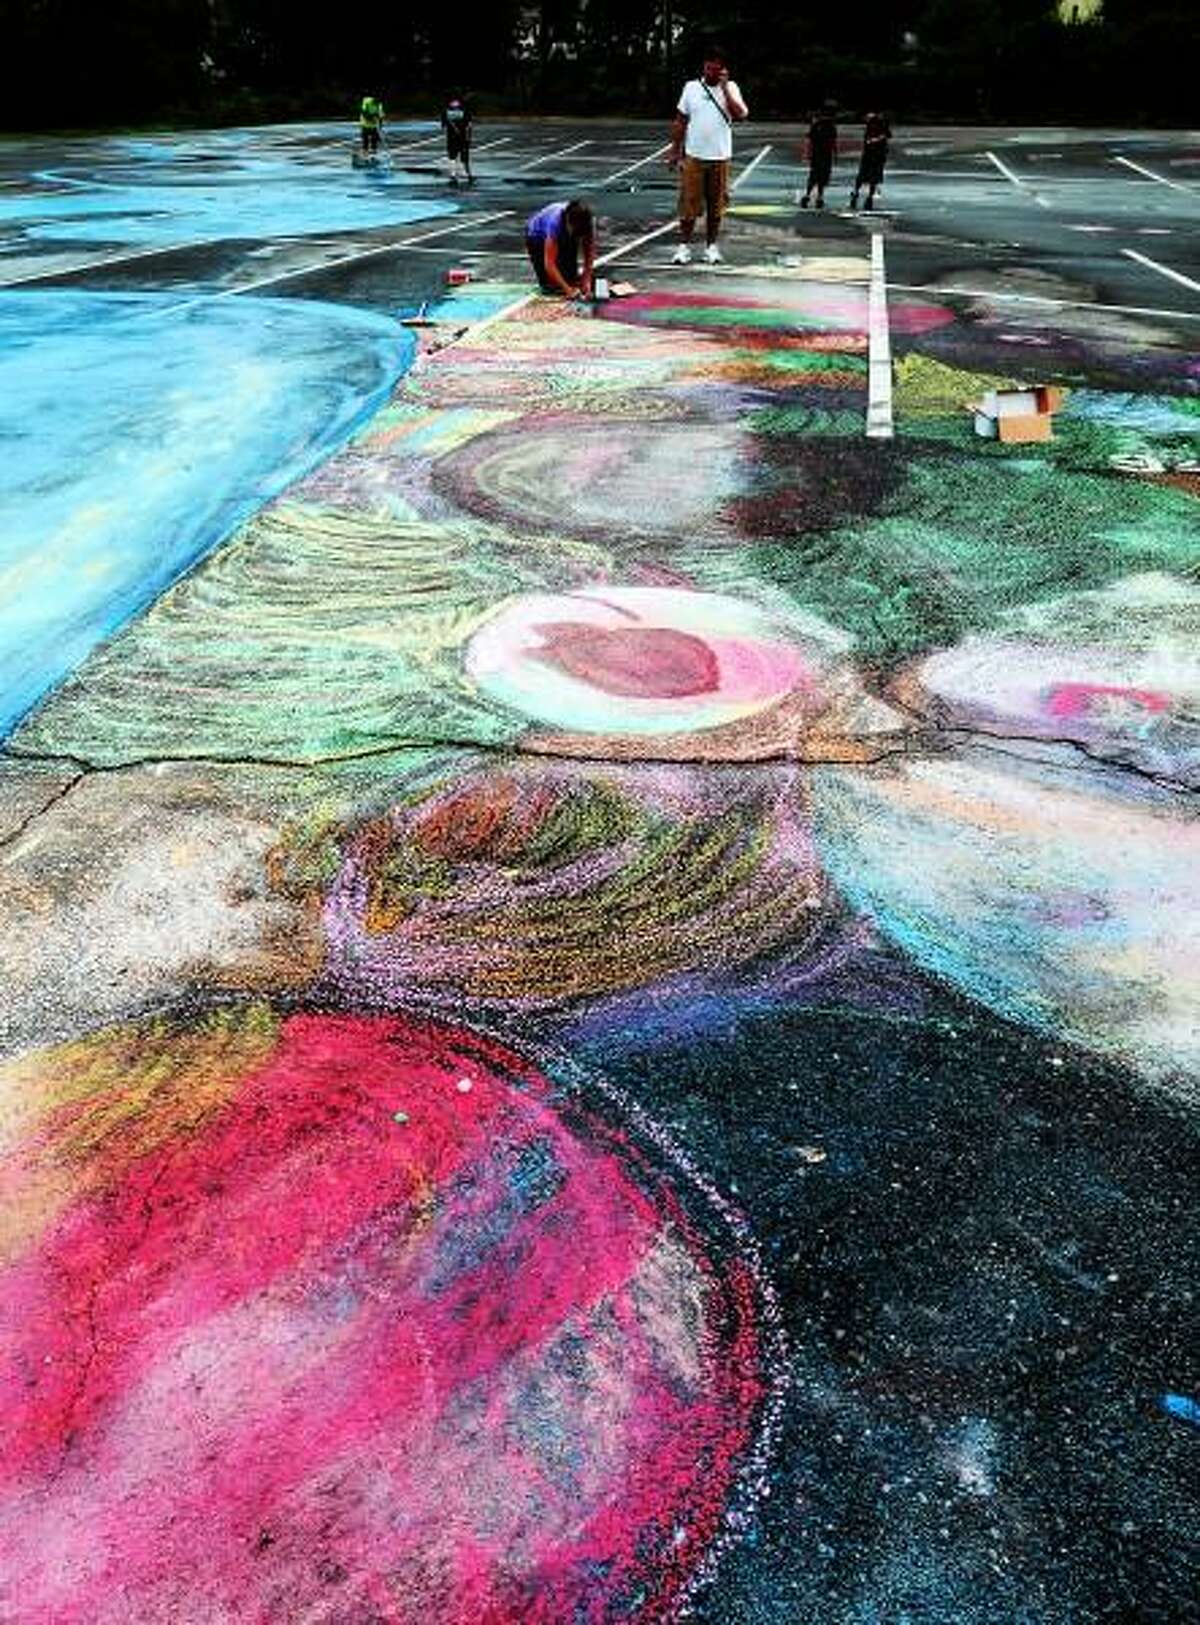 Peter Hvizdak â?? Register West Haven is looking to break a world record for the biggest chalk drawing in the West Haven High School Parking Lot.